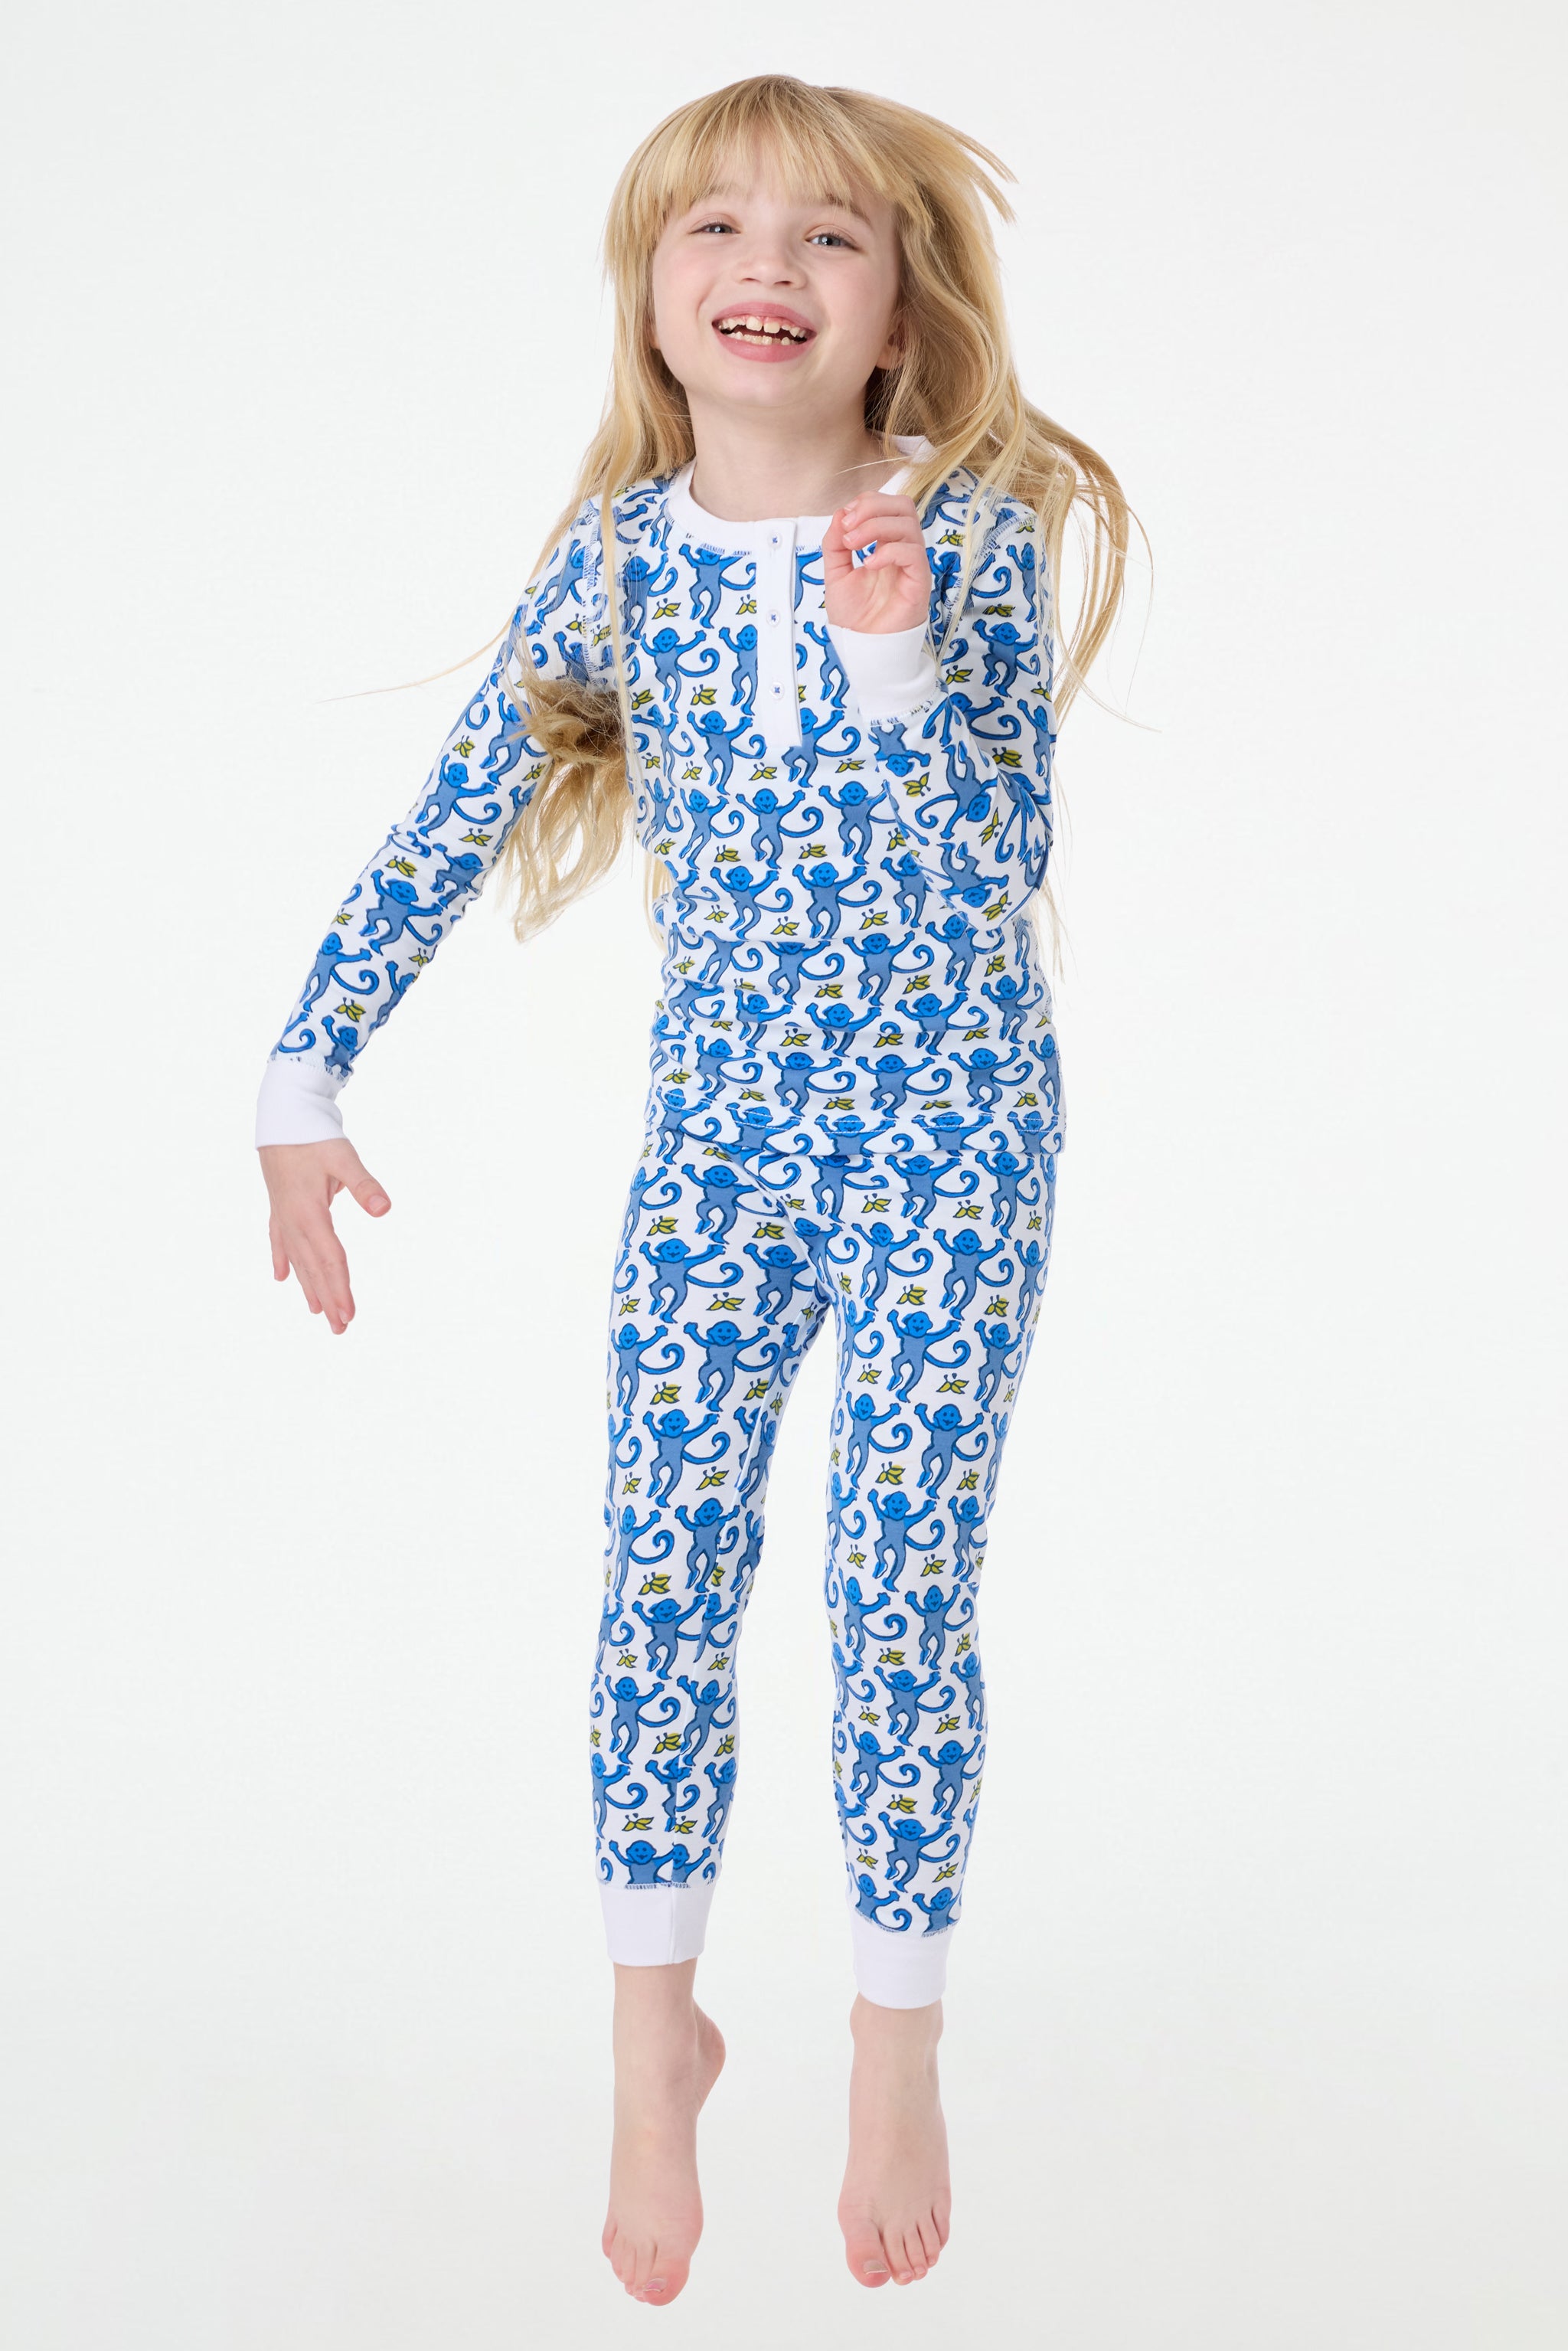 Bunny Pajamas for 1 to 6 Years Old, Kids Jammies for Bunny Lovers